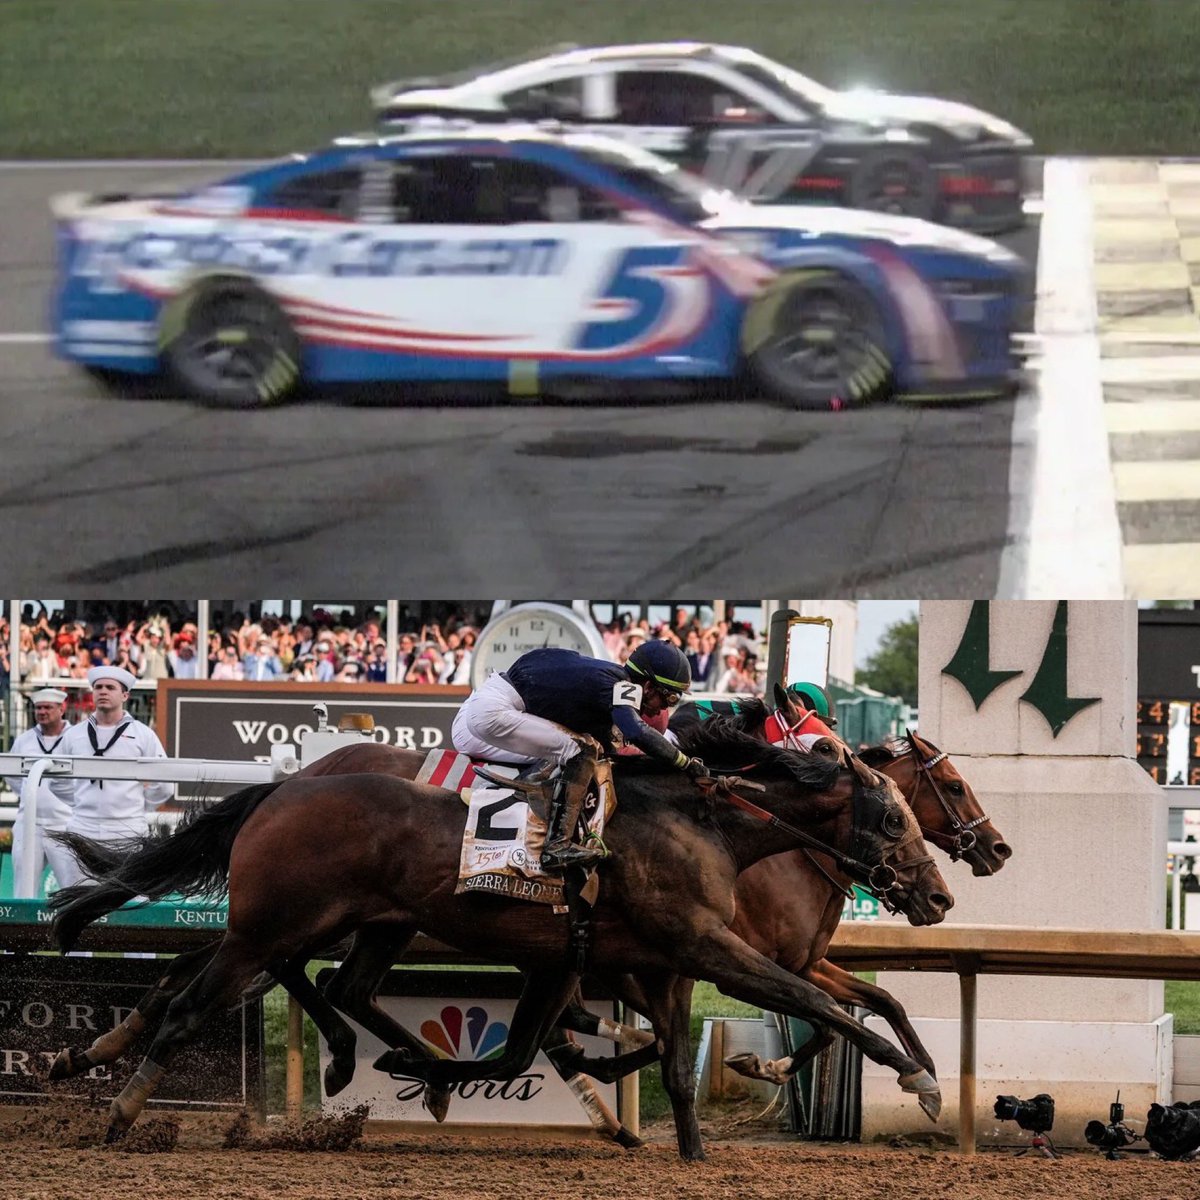 🏇🏁 Which was better: the #KentuckyDerby or NASCAR's #AdventHealth400? 🤔 Both were amazing! #HorseRacing #Motorsports #DerbyVsNASCAR #RacingFans #SportsDebate #FastAndFurious #ExcitingEvents #ThrillingFinish #SundayShowdown #SportsEntertainment